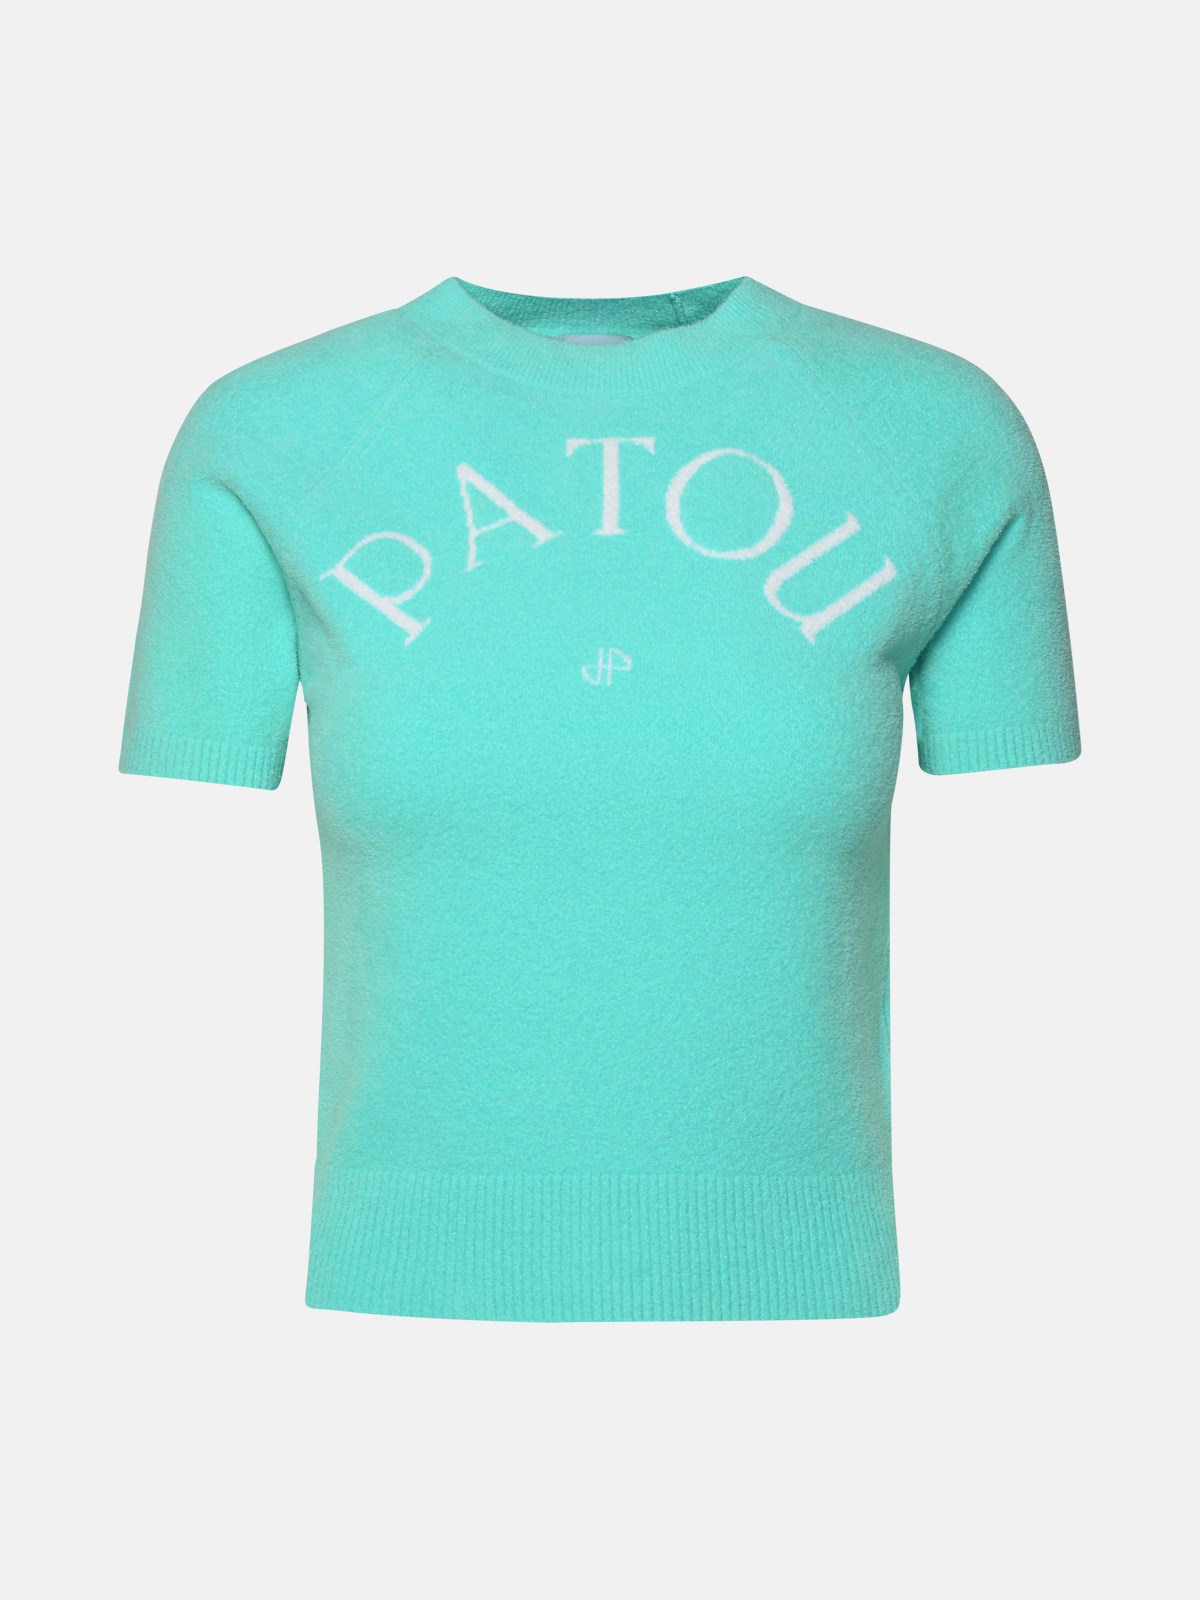 Patou Teal Cotton Blend Sweater In Light Blue